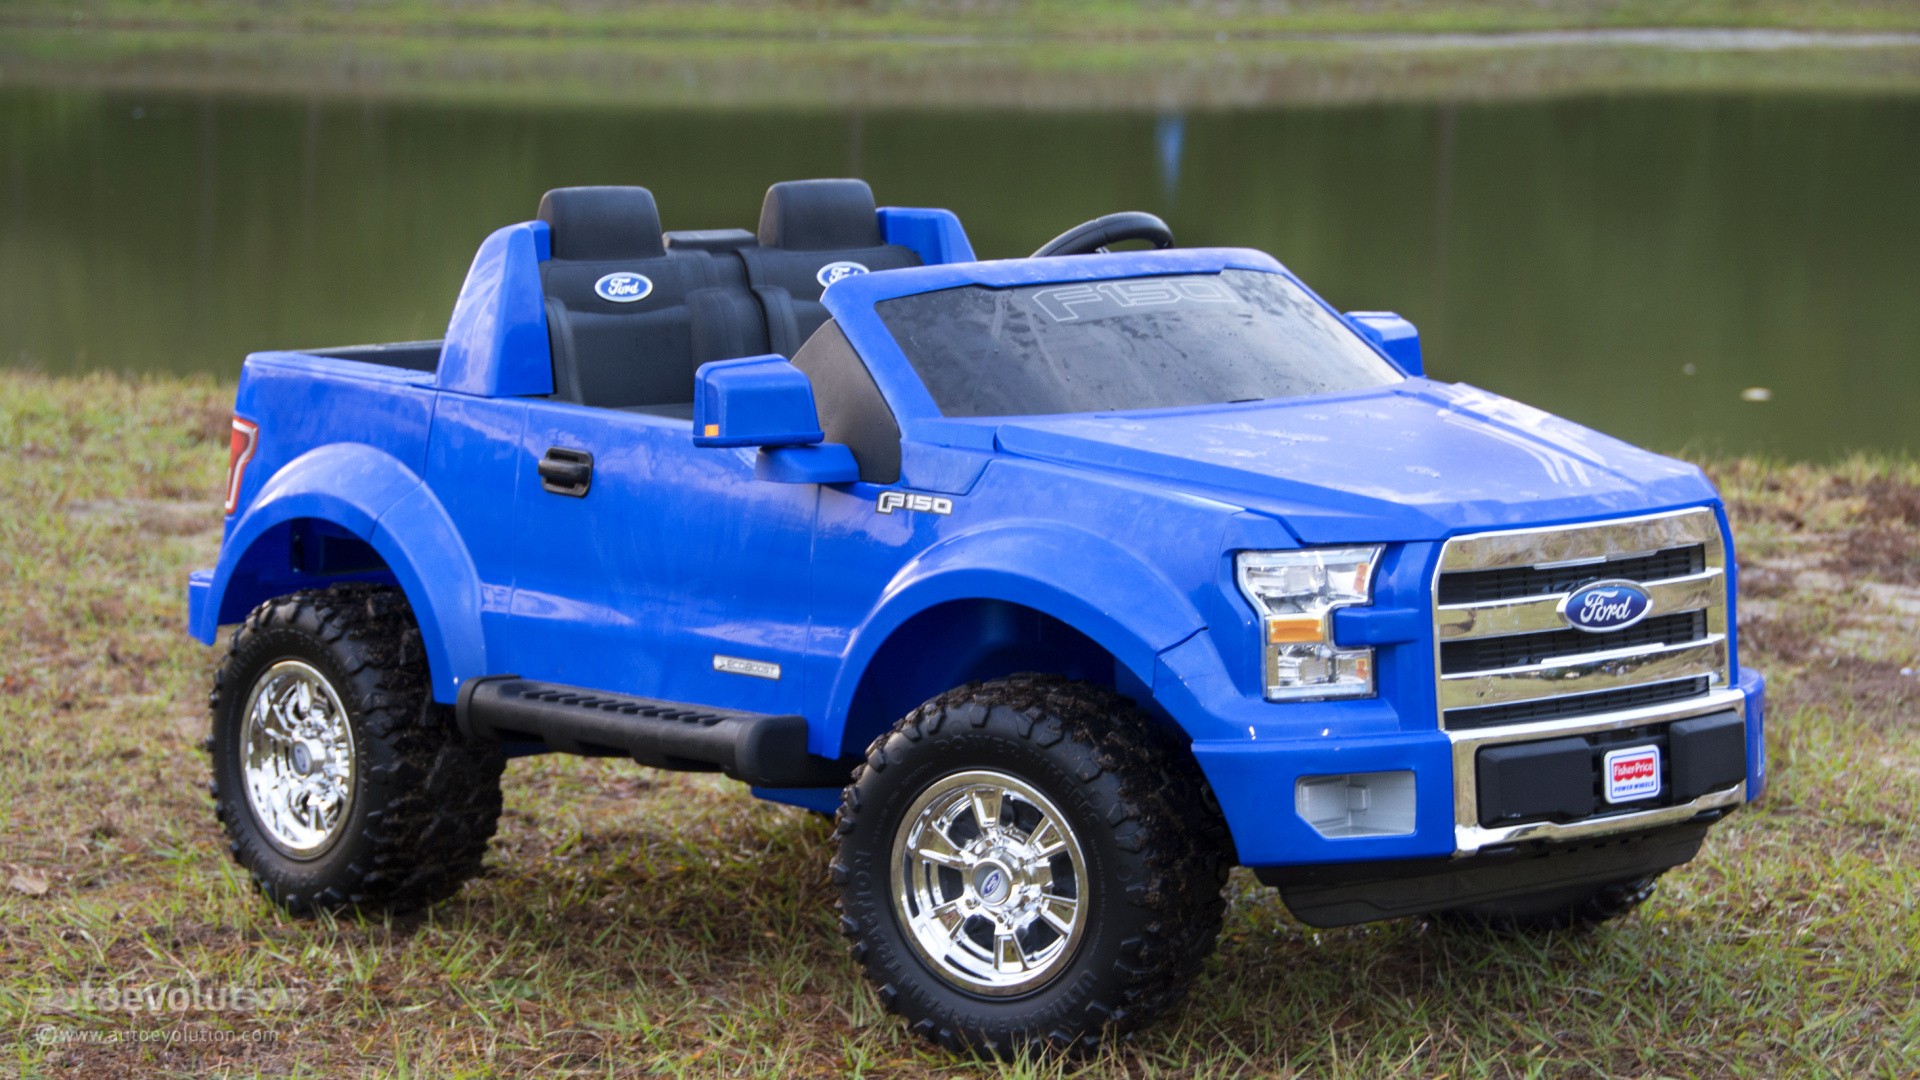 Latestcarnews: We Review the Power Wheels Ford F-150: The Best Kid